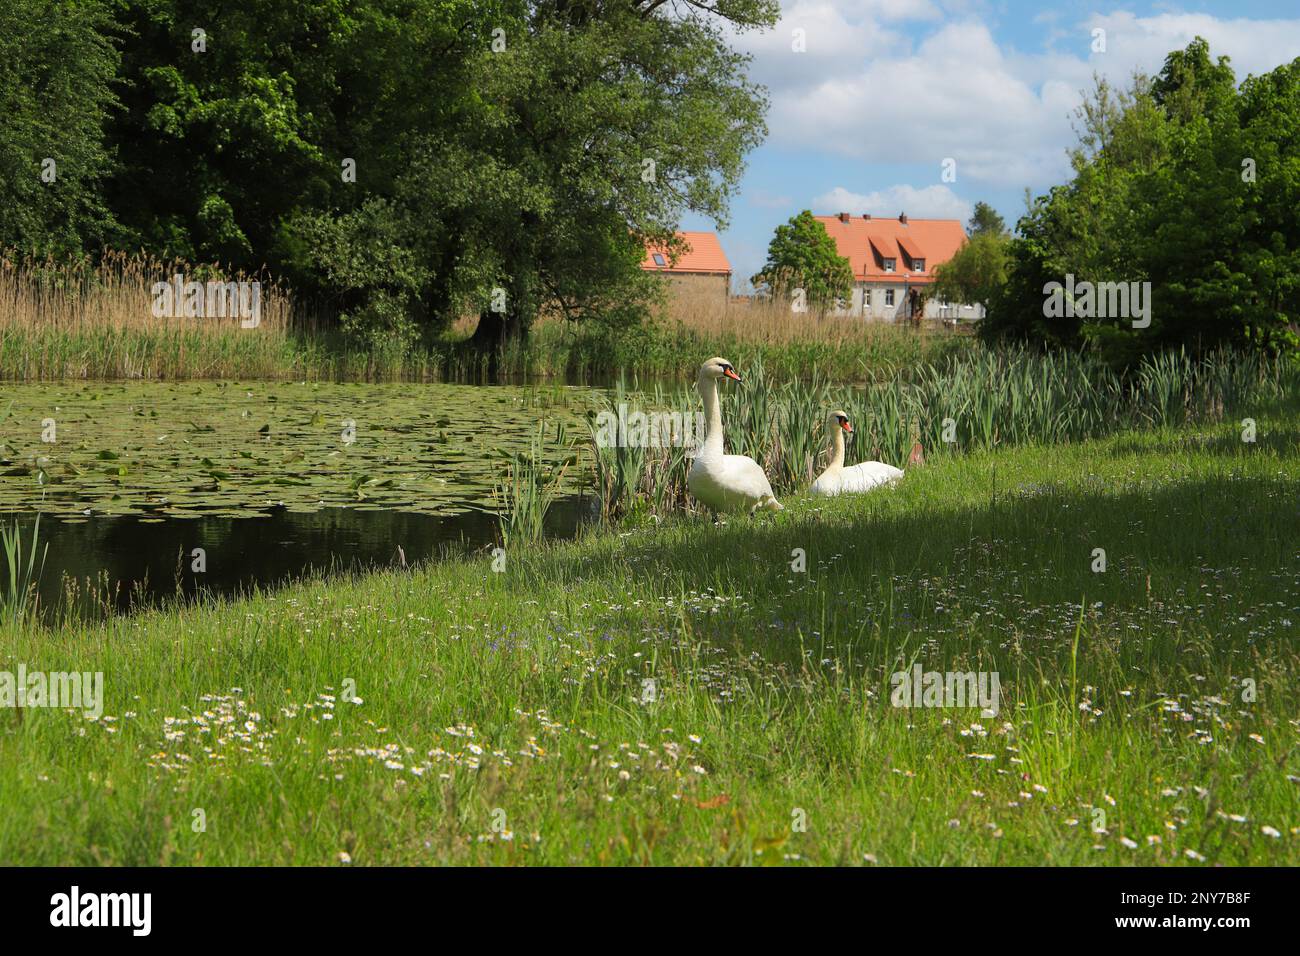 View to the wild little lake in the historic village Ihlow with cute white swans, federal State Brandenburg - Germany Stock Photo